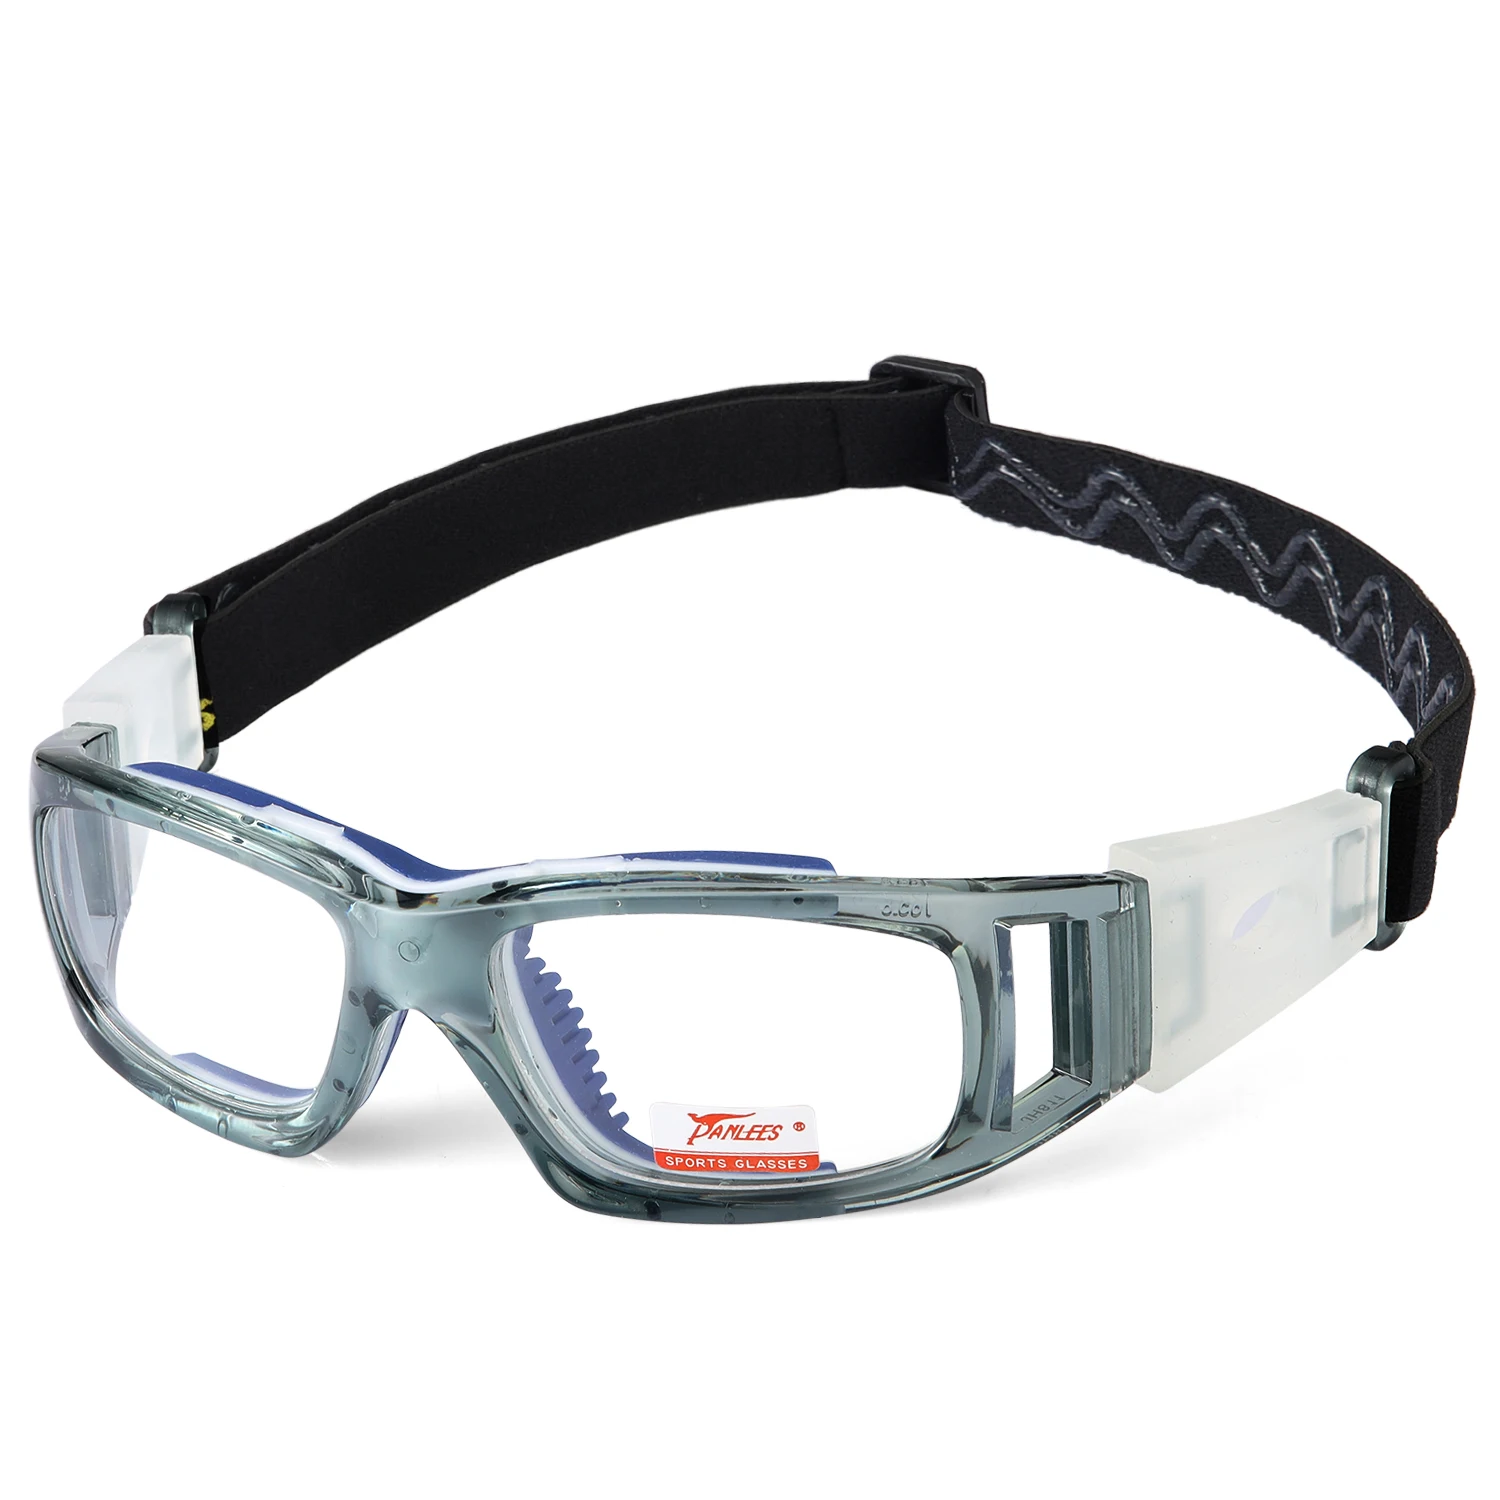 New Sport protective glasses eyewear basketball football soccer safety goggles 